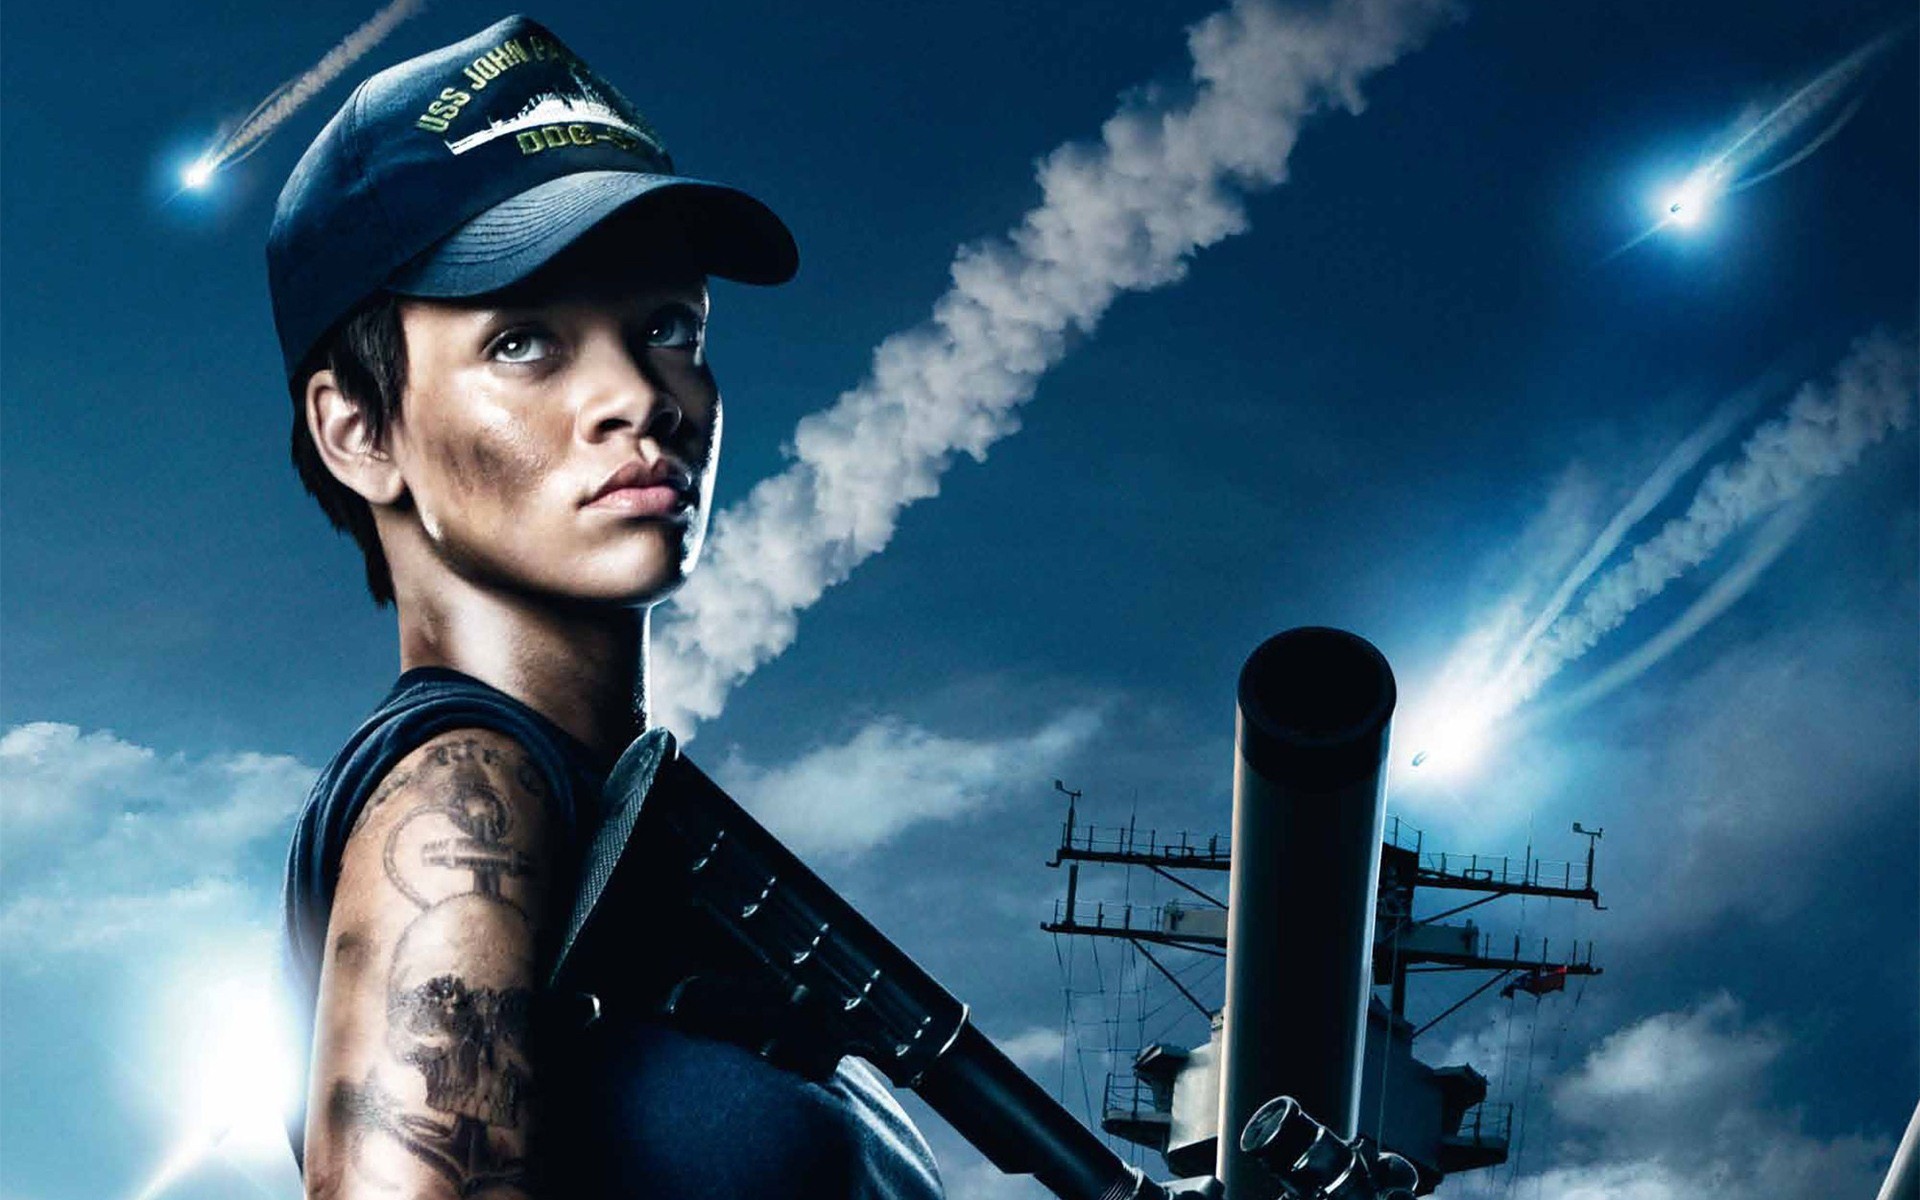 movies, Actress, Rihanna, People, Celebrity, Battleship, Girls, With, Guns, Singers, Skyscapes Wallpaper